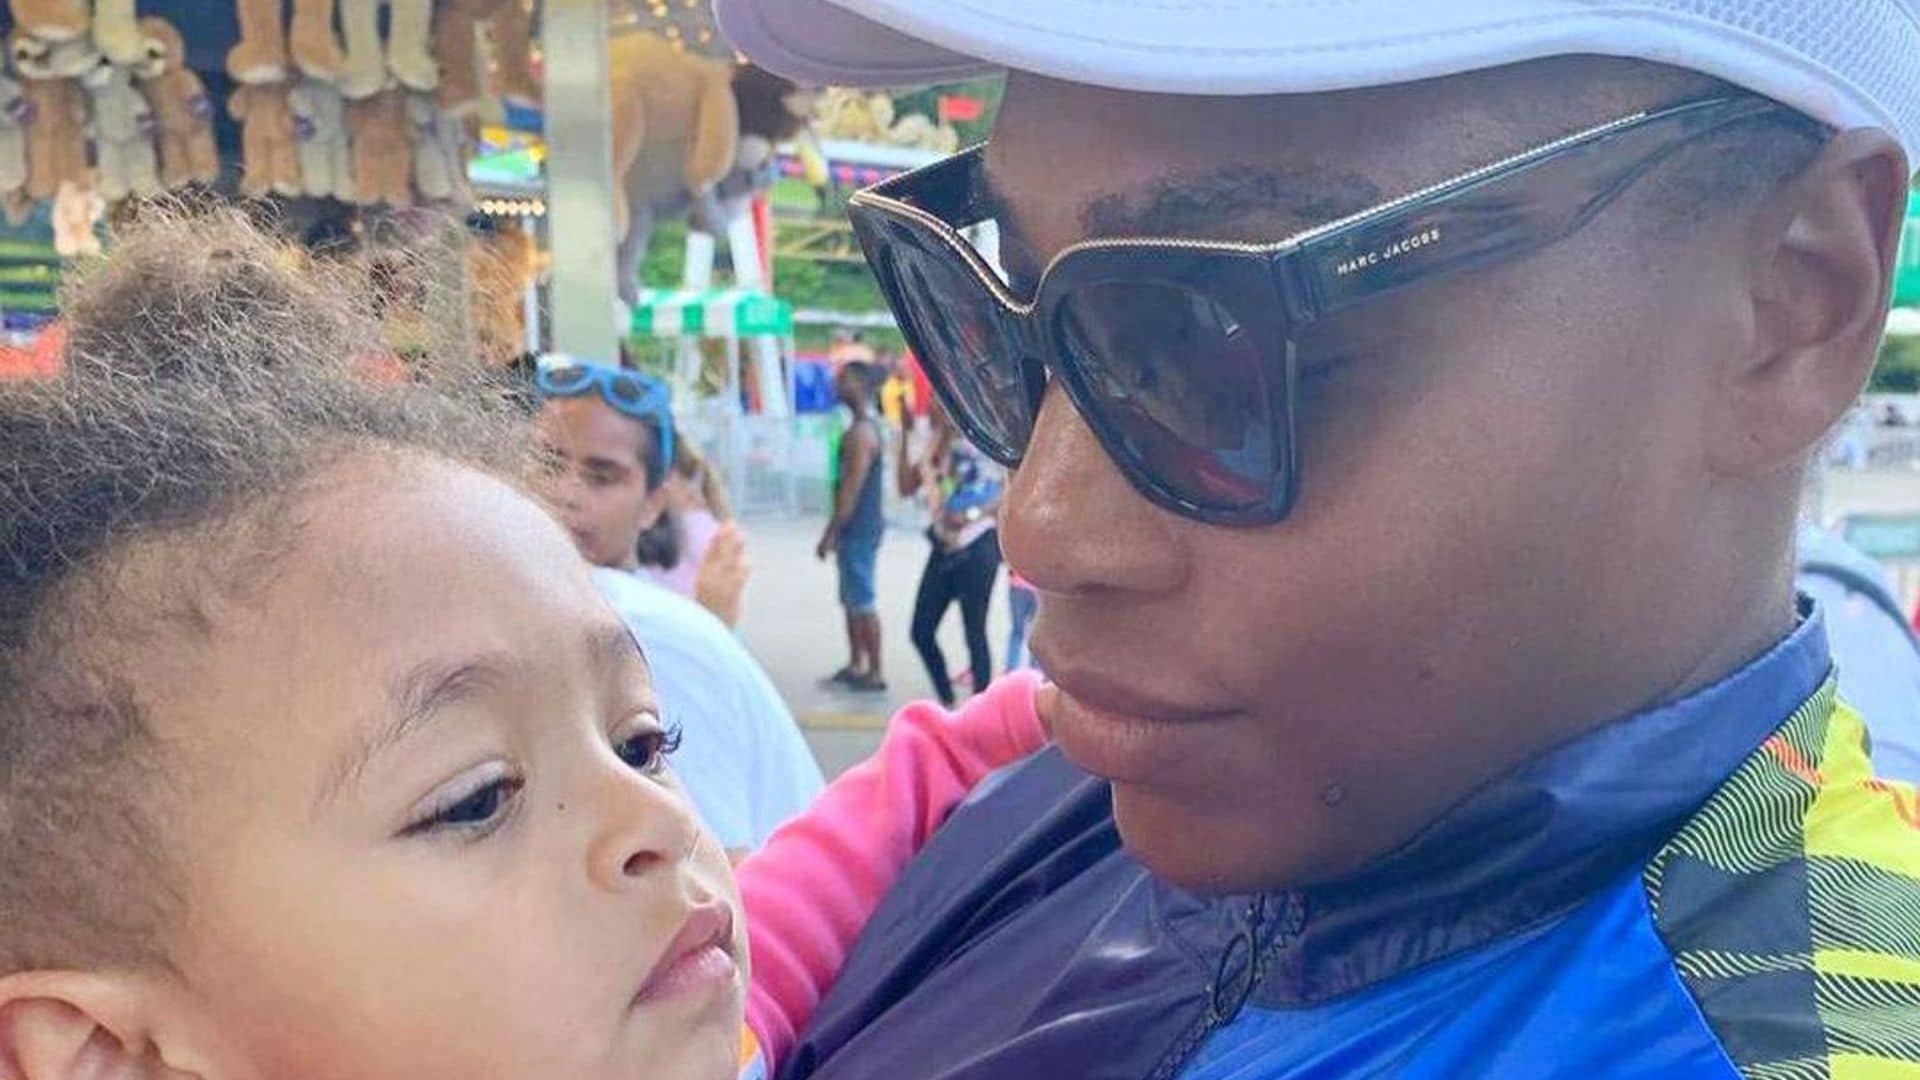 Serena Williams’ daughter takes a nap on her ‘stressed mom’ in candid photo